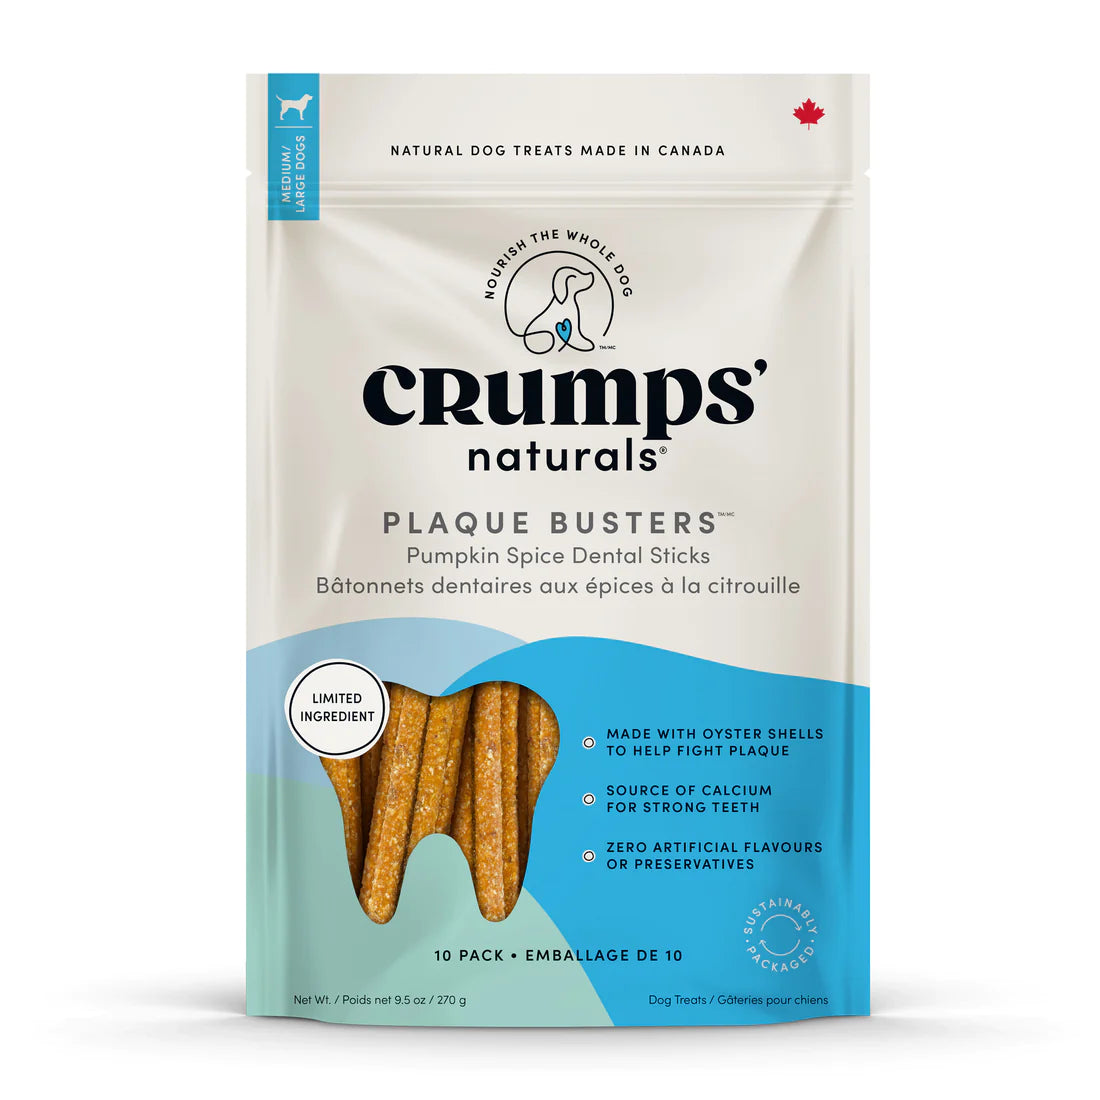 Crumps Plaque Busters with Pumpkin Spice